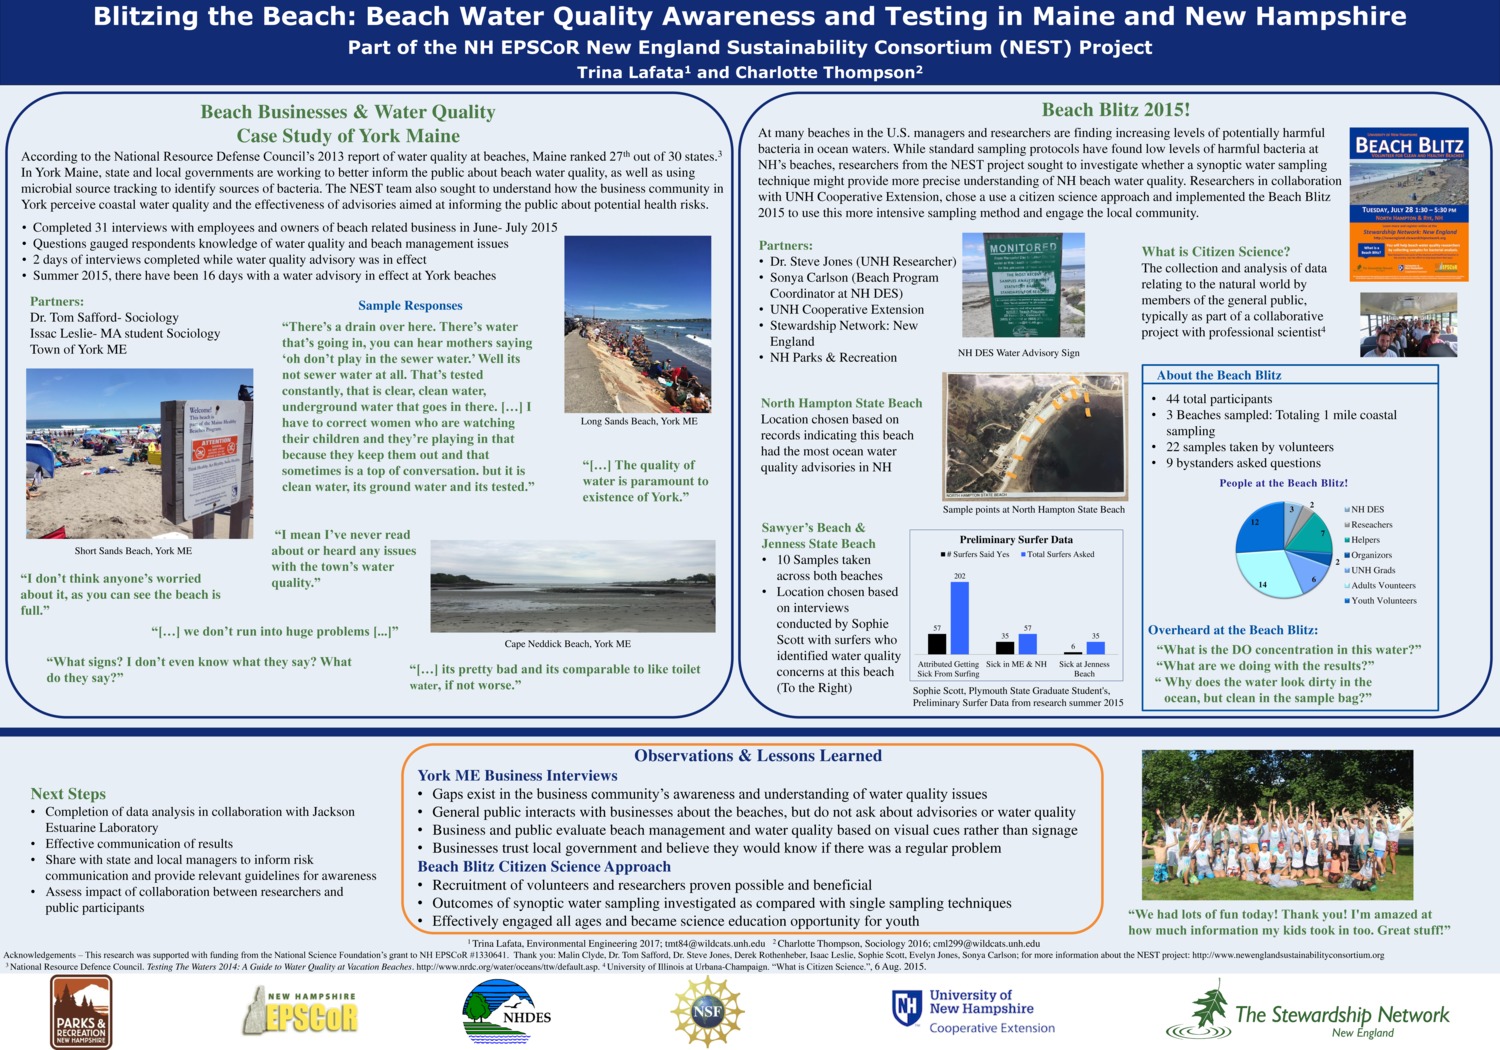 Blitzing The Beach: Beach Water Quality Awareness And Testing In Maine And New Hampshire  by cml299